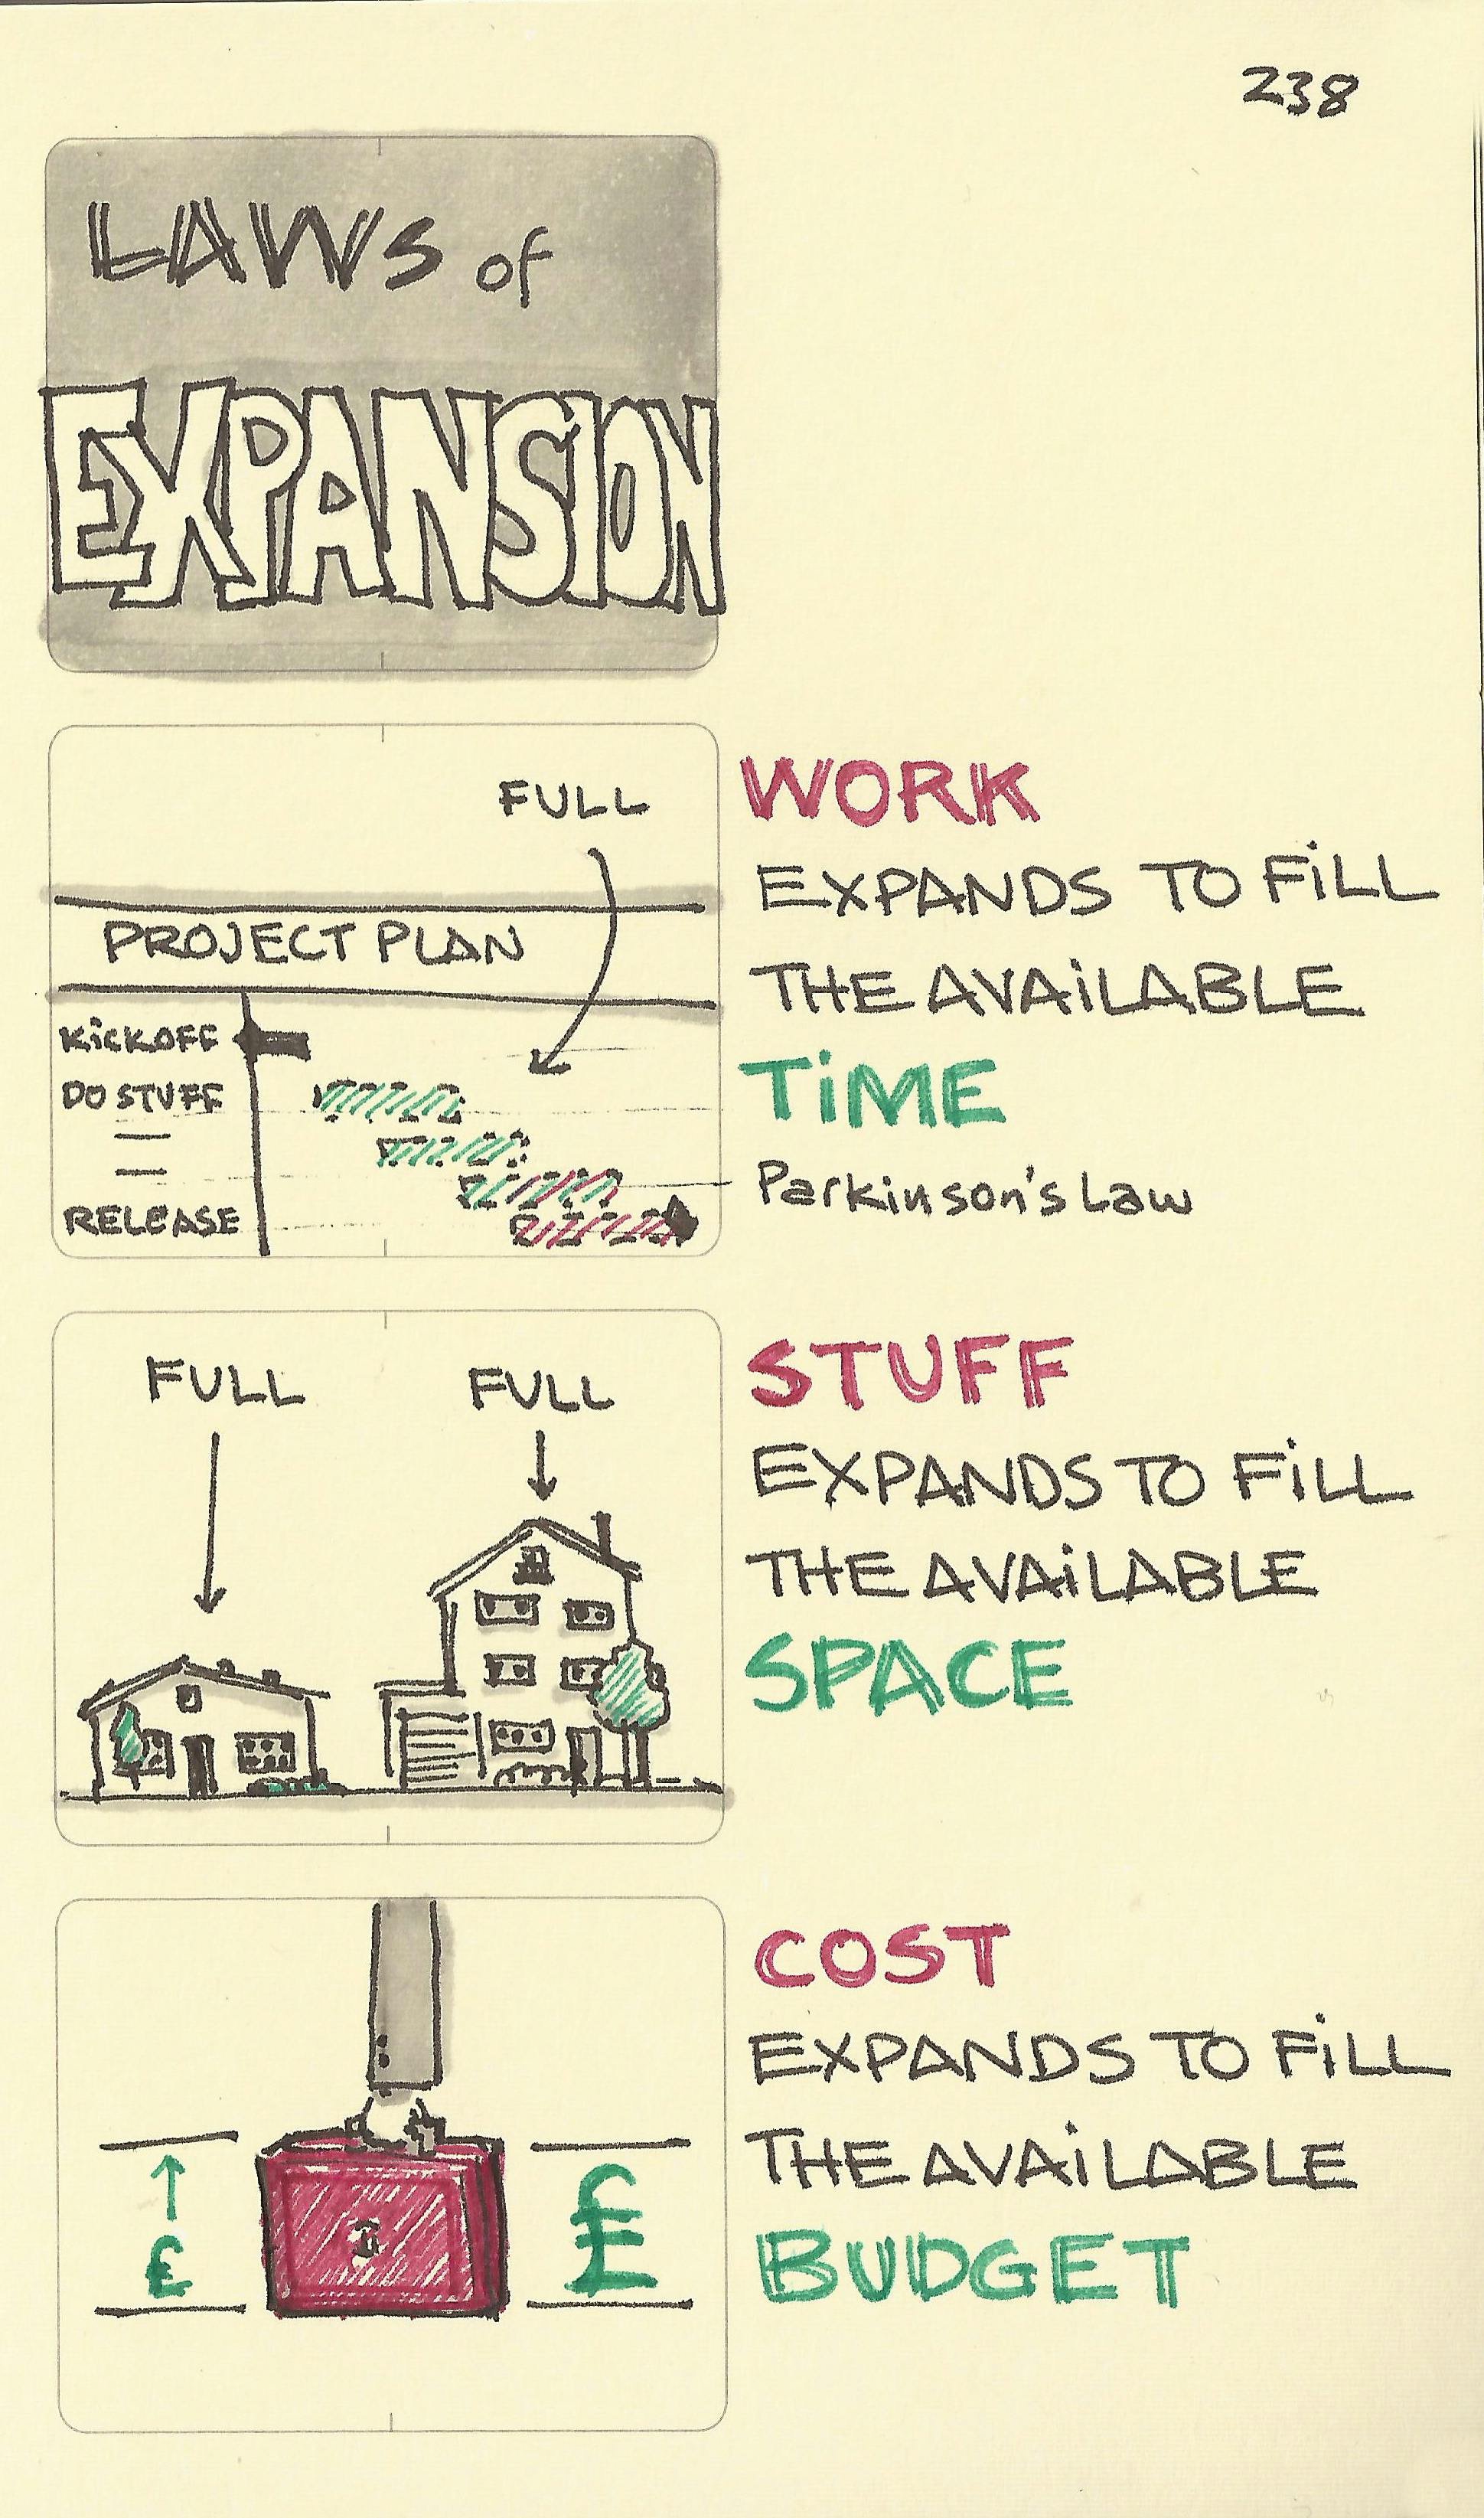 Sketches of the laws of expansion: a gantt chart shows Parkinson's Law — Work expands to fill the available time; two houses show Stuff expands to fill the available space; and a budget suitcase shows Cost expands to fill the available budget